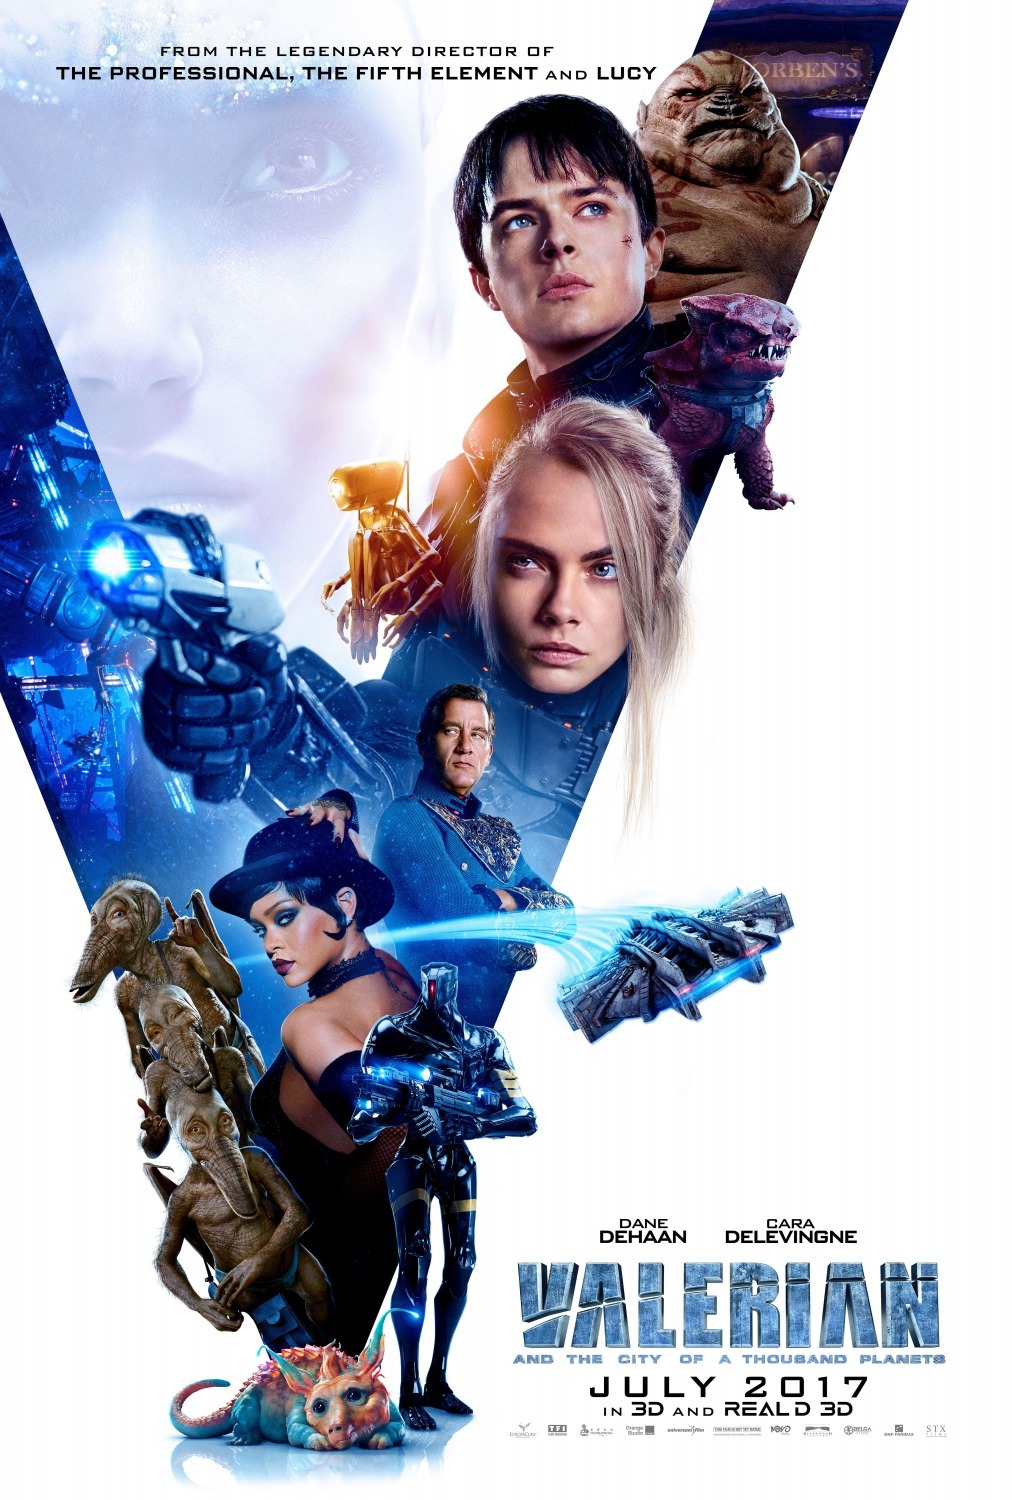 Valerian and the City of a Thousand Planets [700MB] 2017 720p HC HDRip x265 TheMovieFull